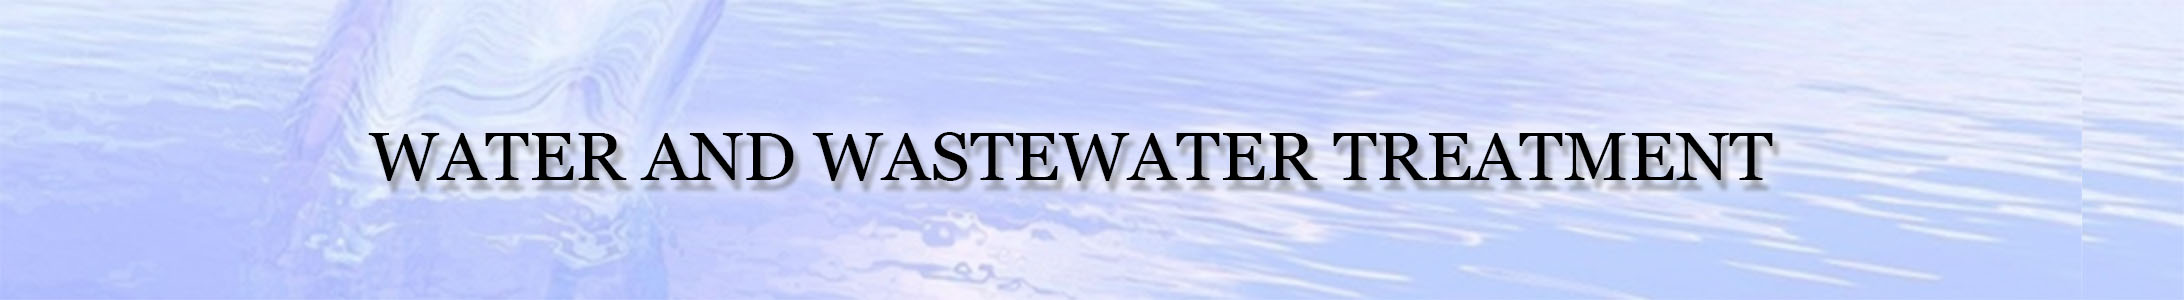 Water and wastewater treatment services